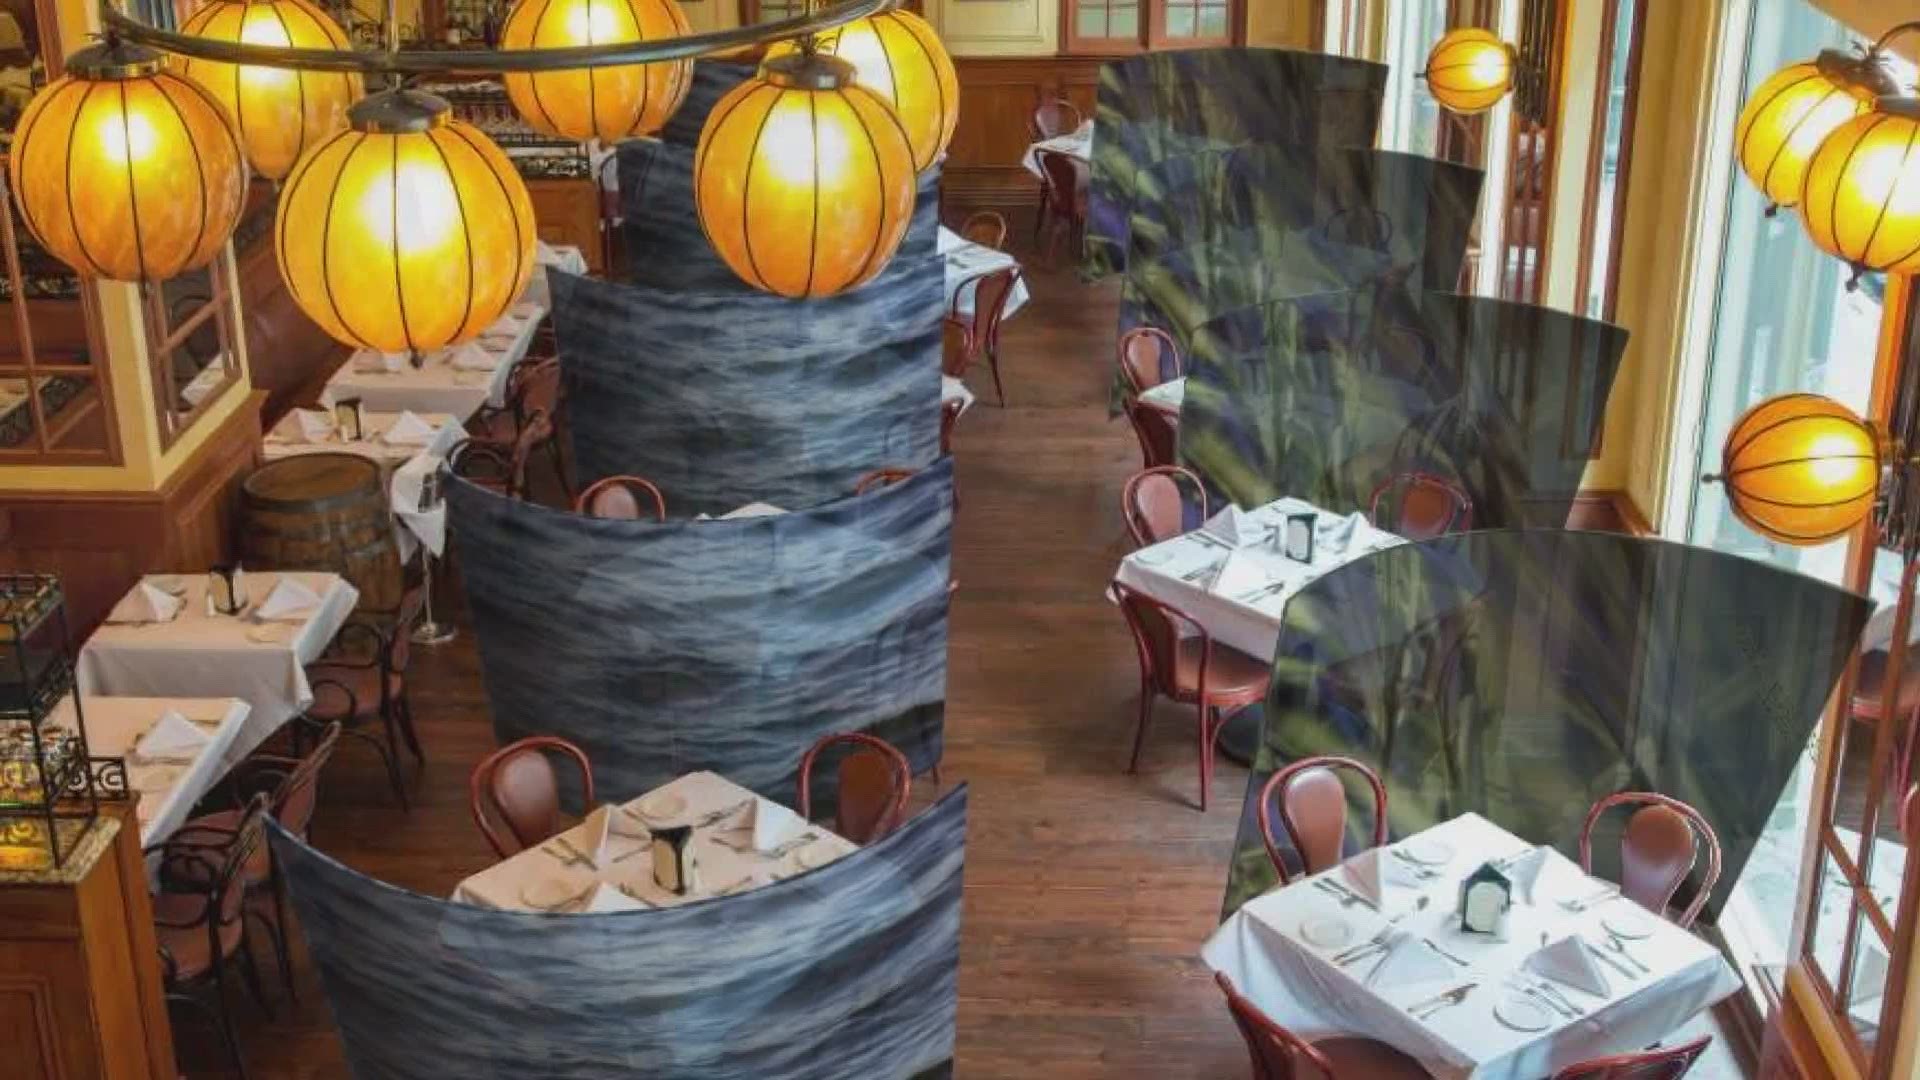 Maine woman creates a new fabric divider that could help restaurants with the coronvirus restrictions